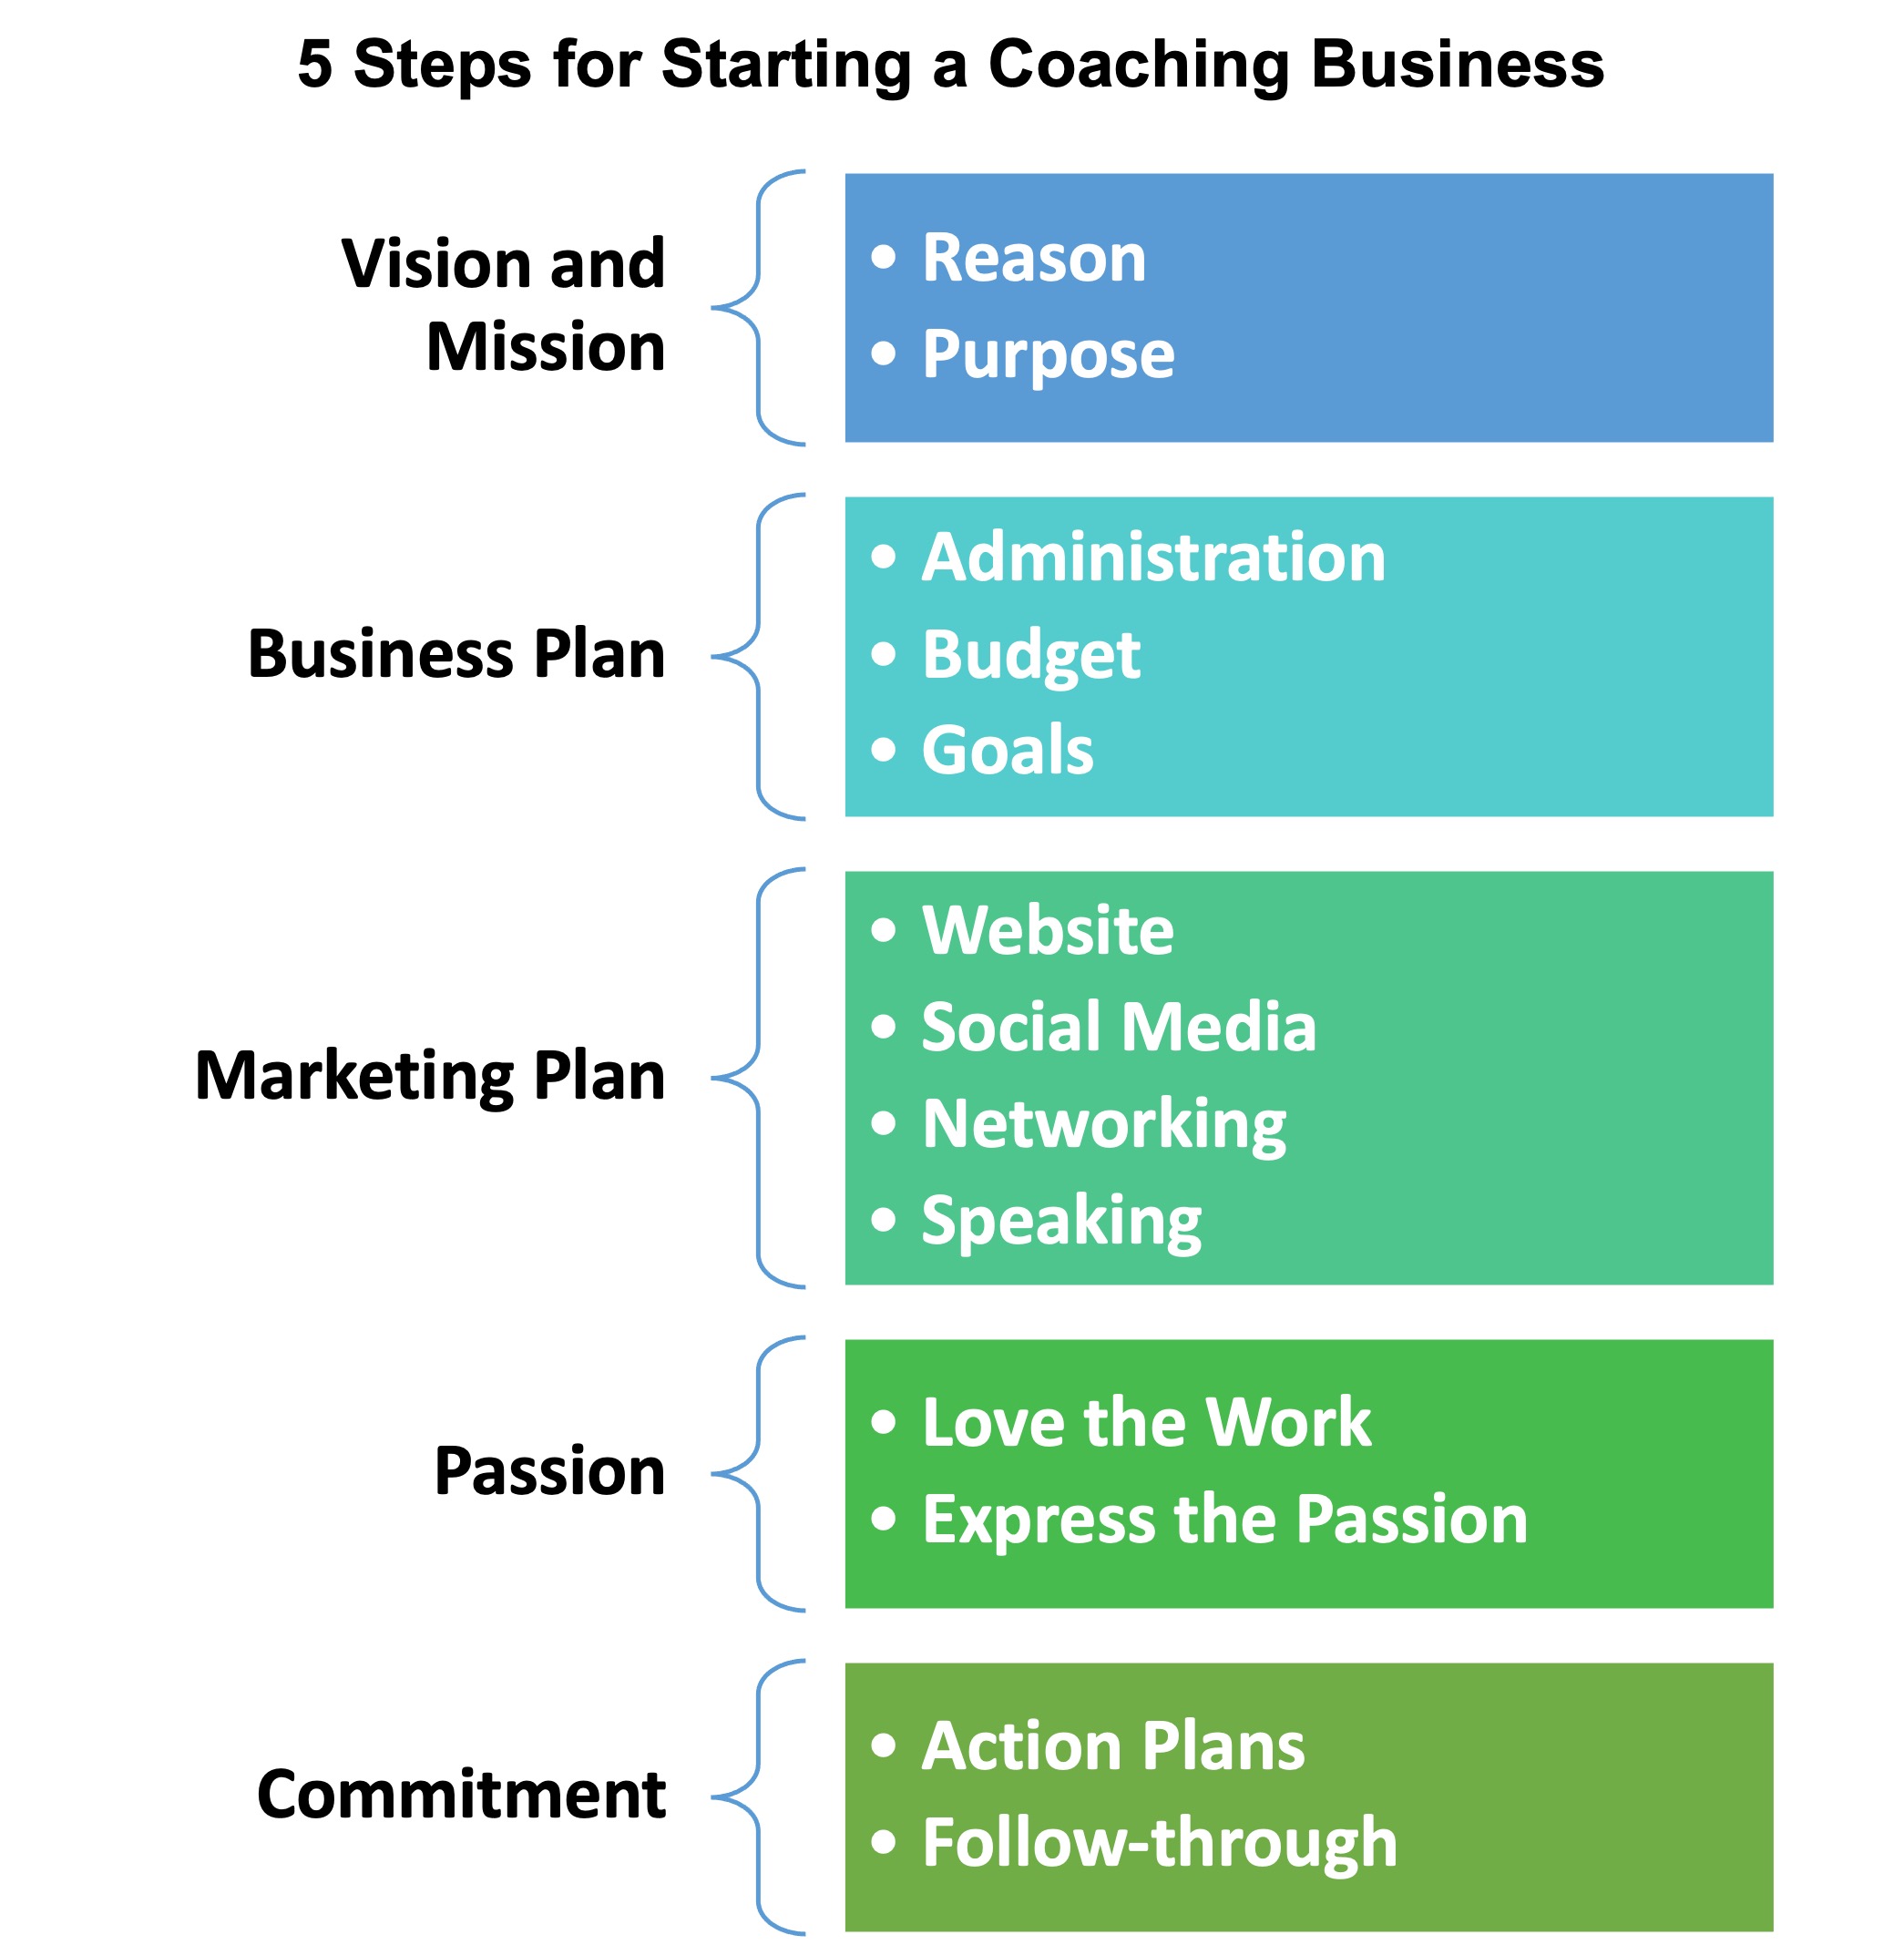 5 Steps for Starting a Coaching Business